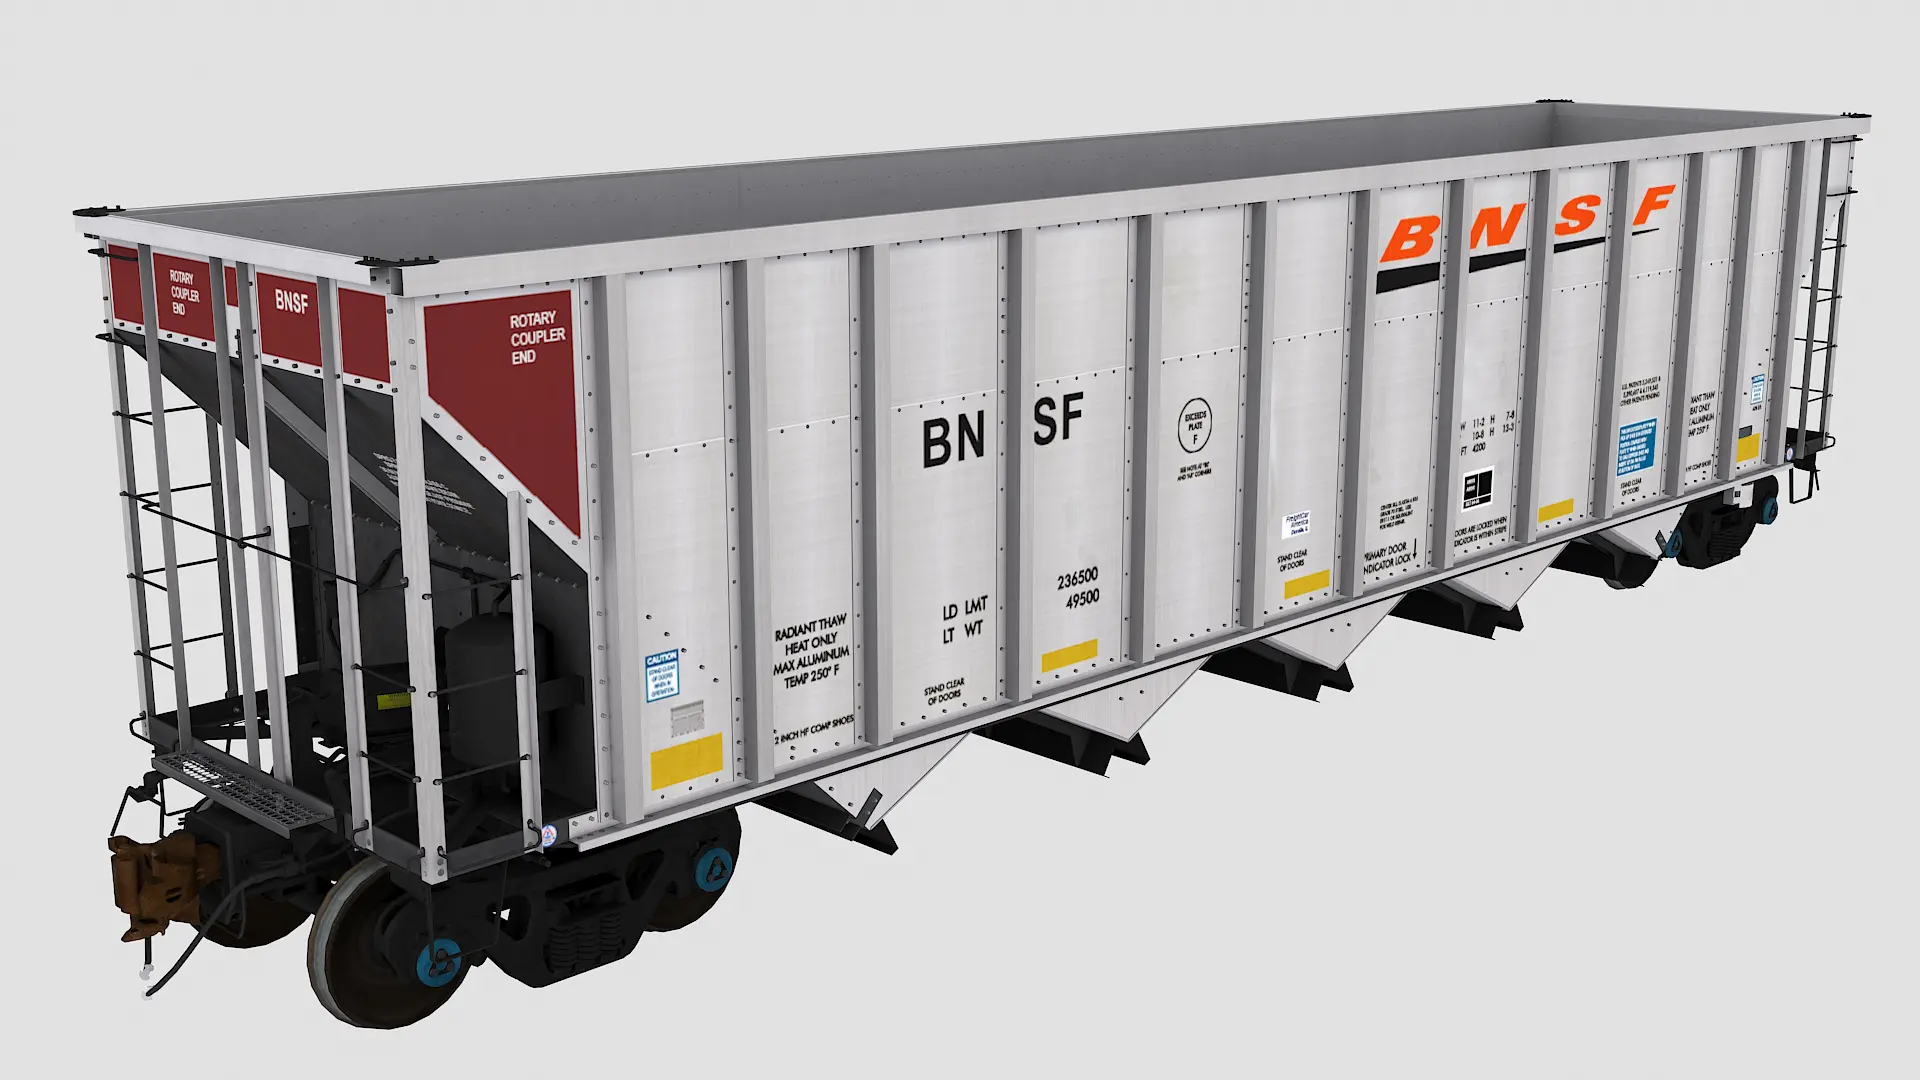 Fca Bnsf, back view of RRMODS company products